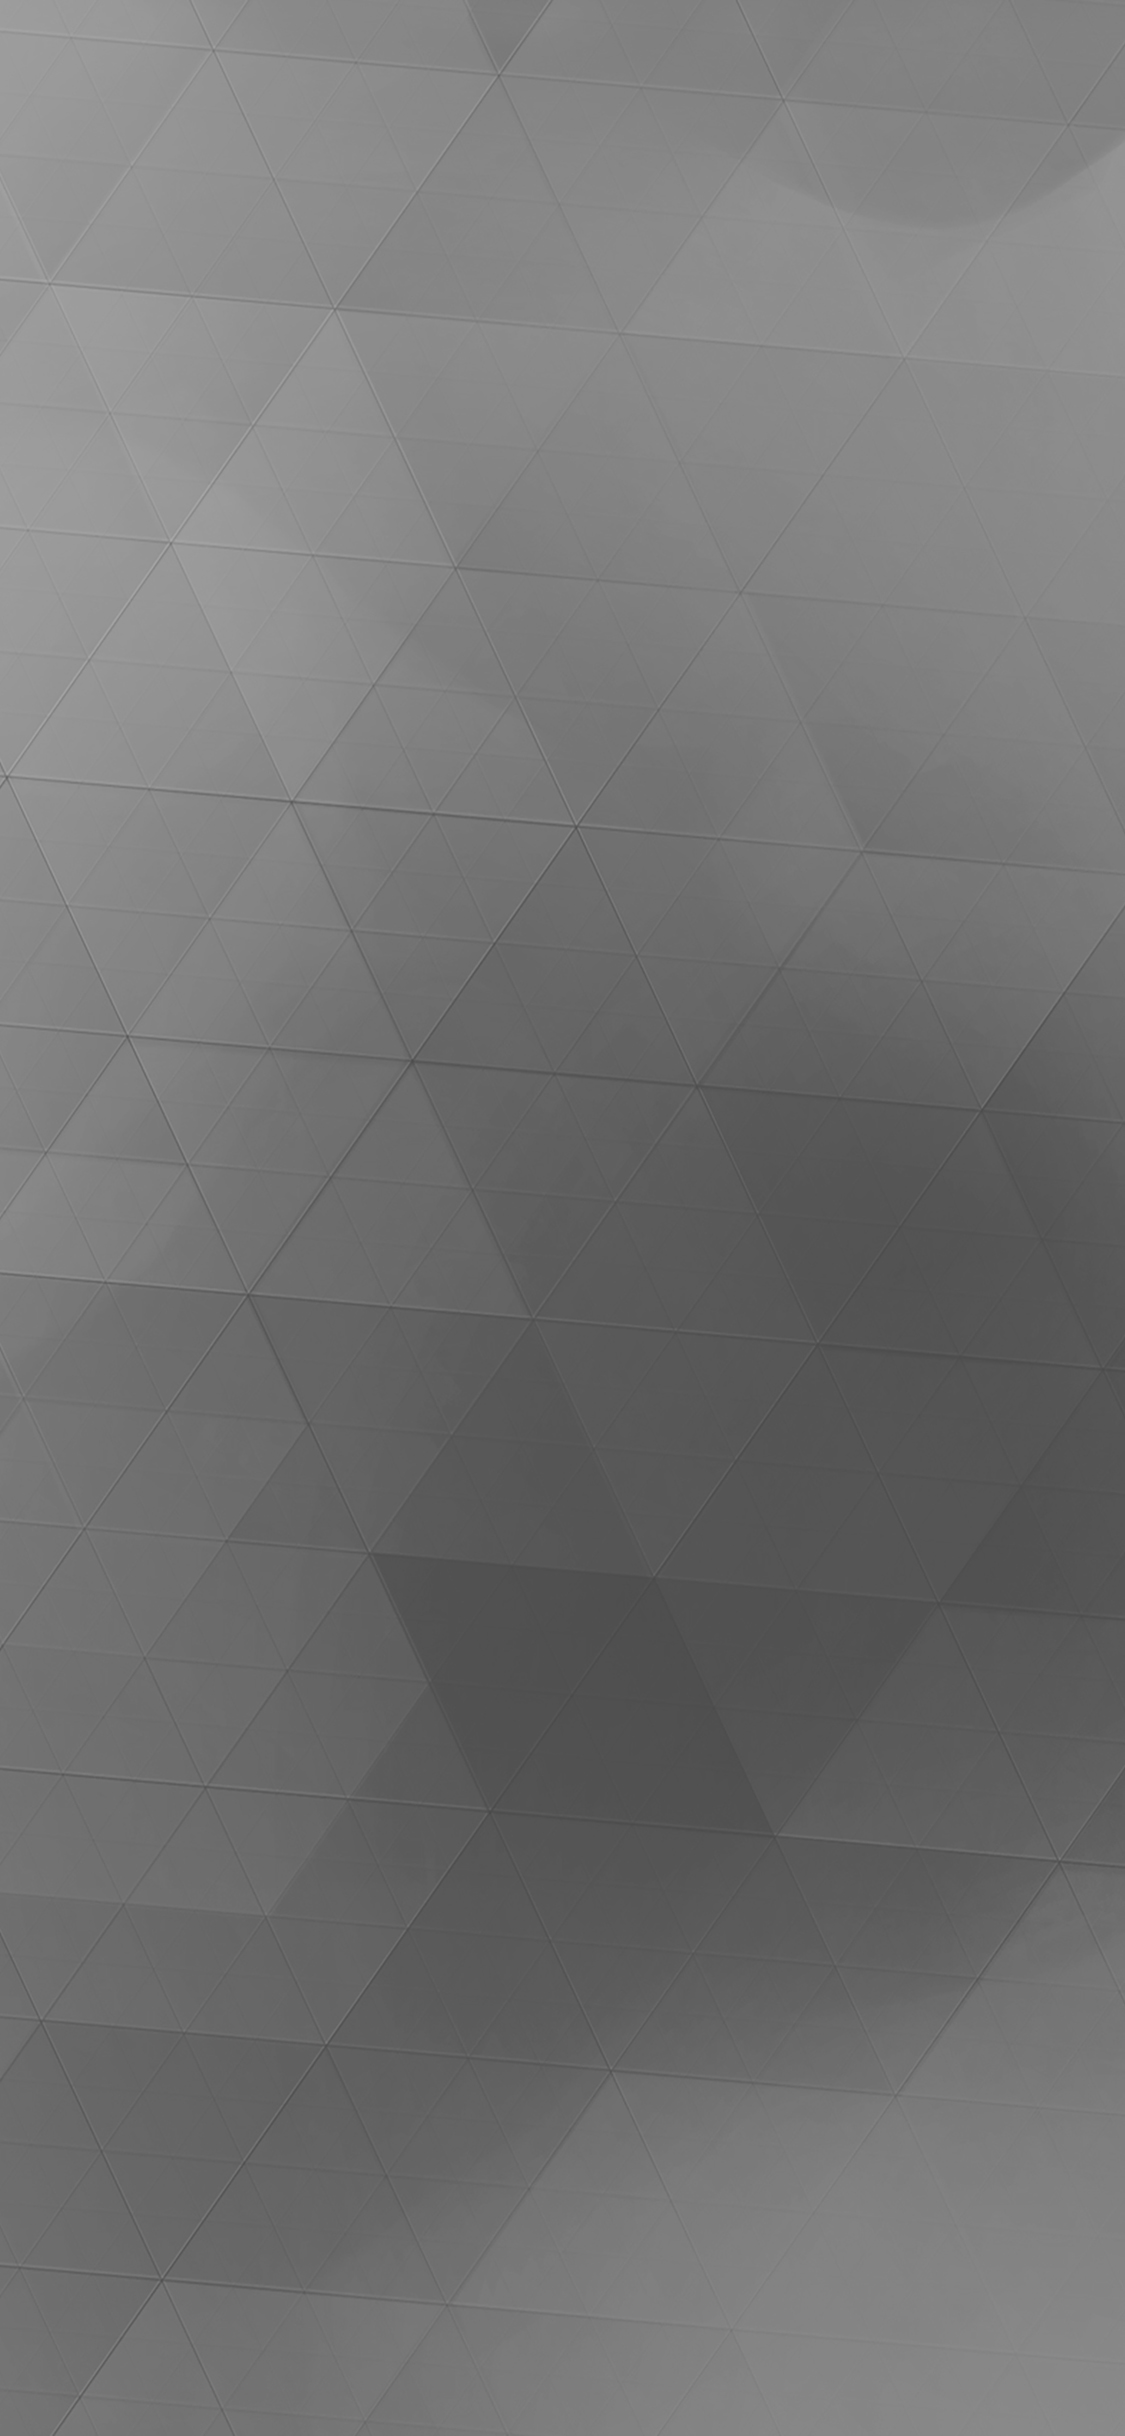 iPhoneXpapers android gray wall pattern